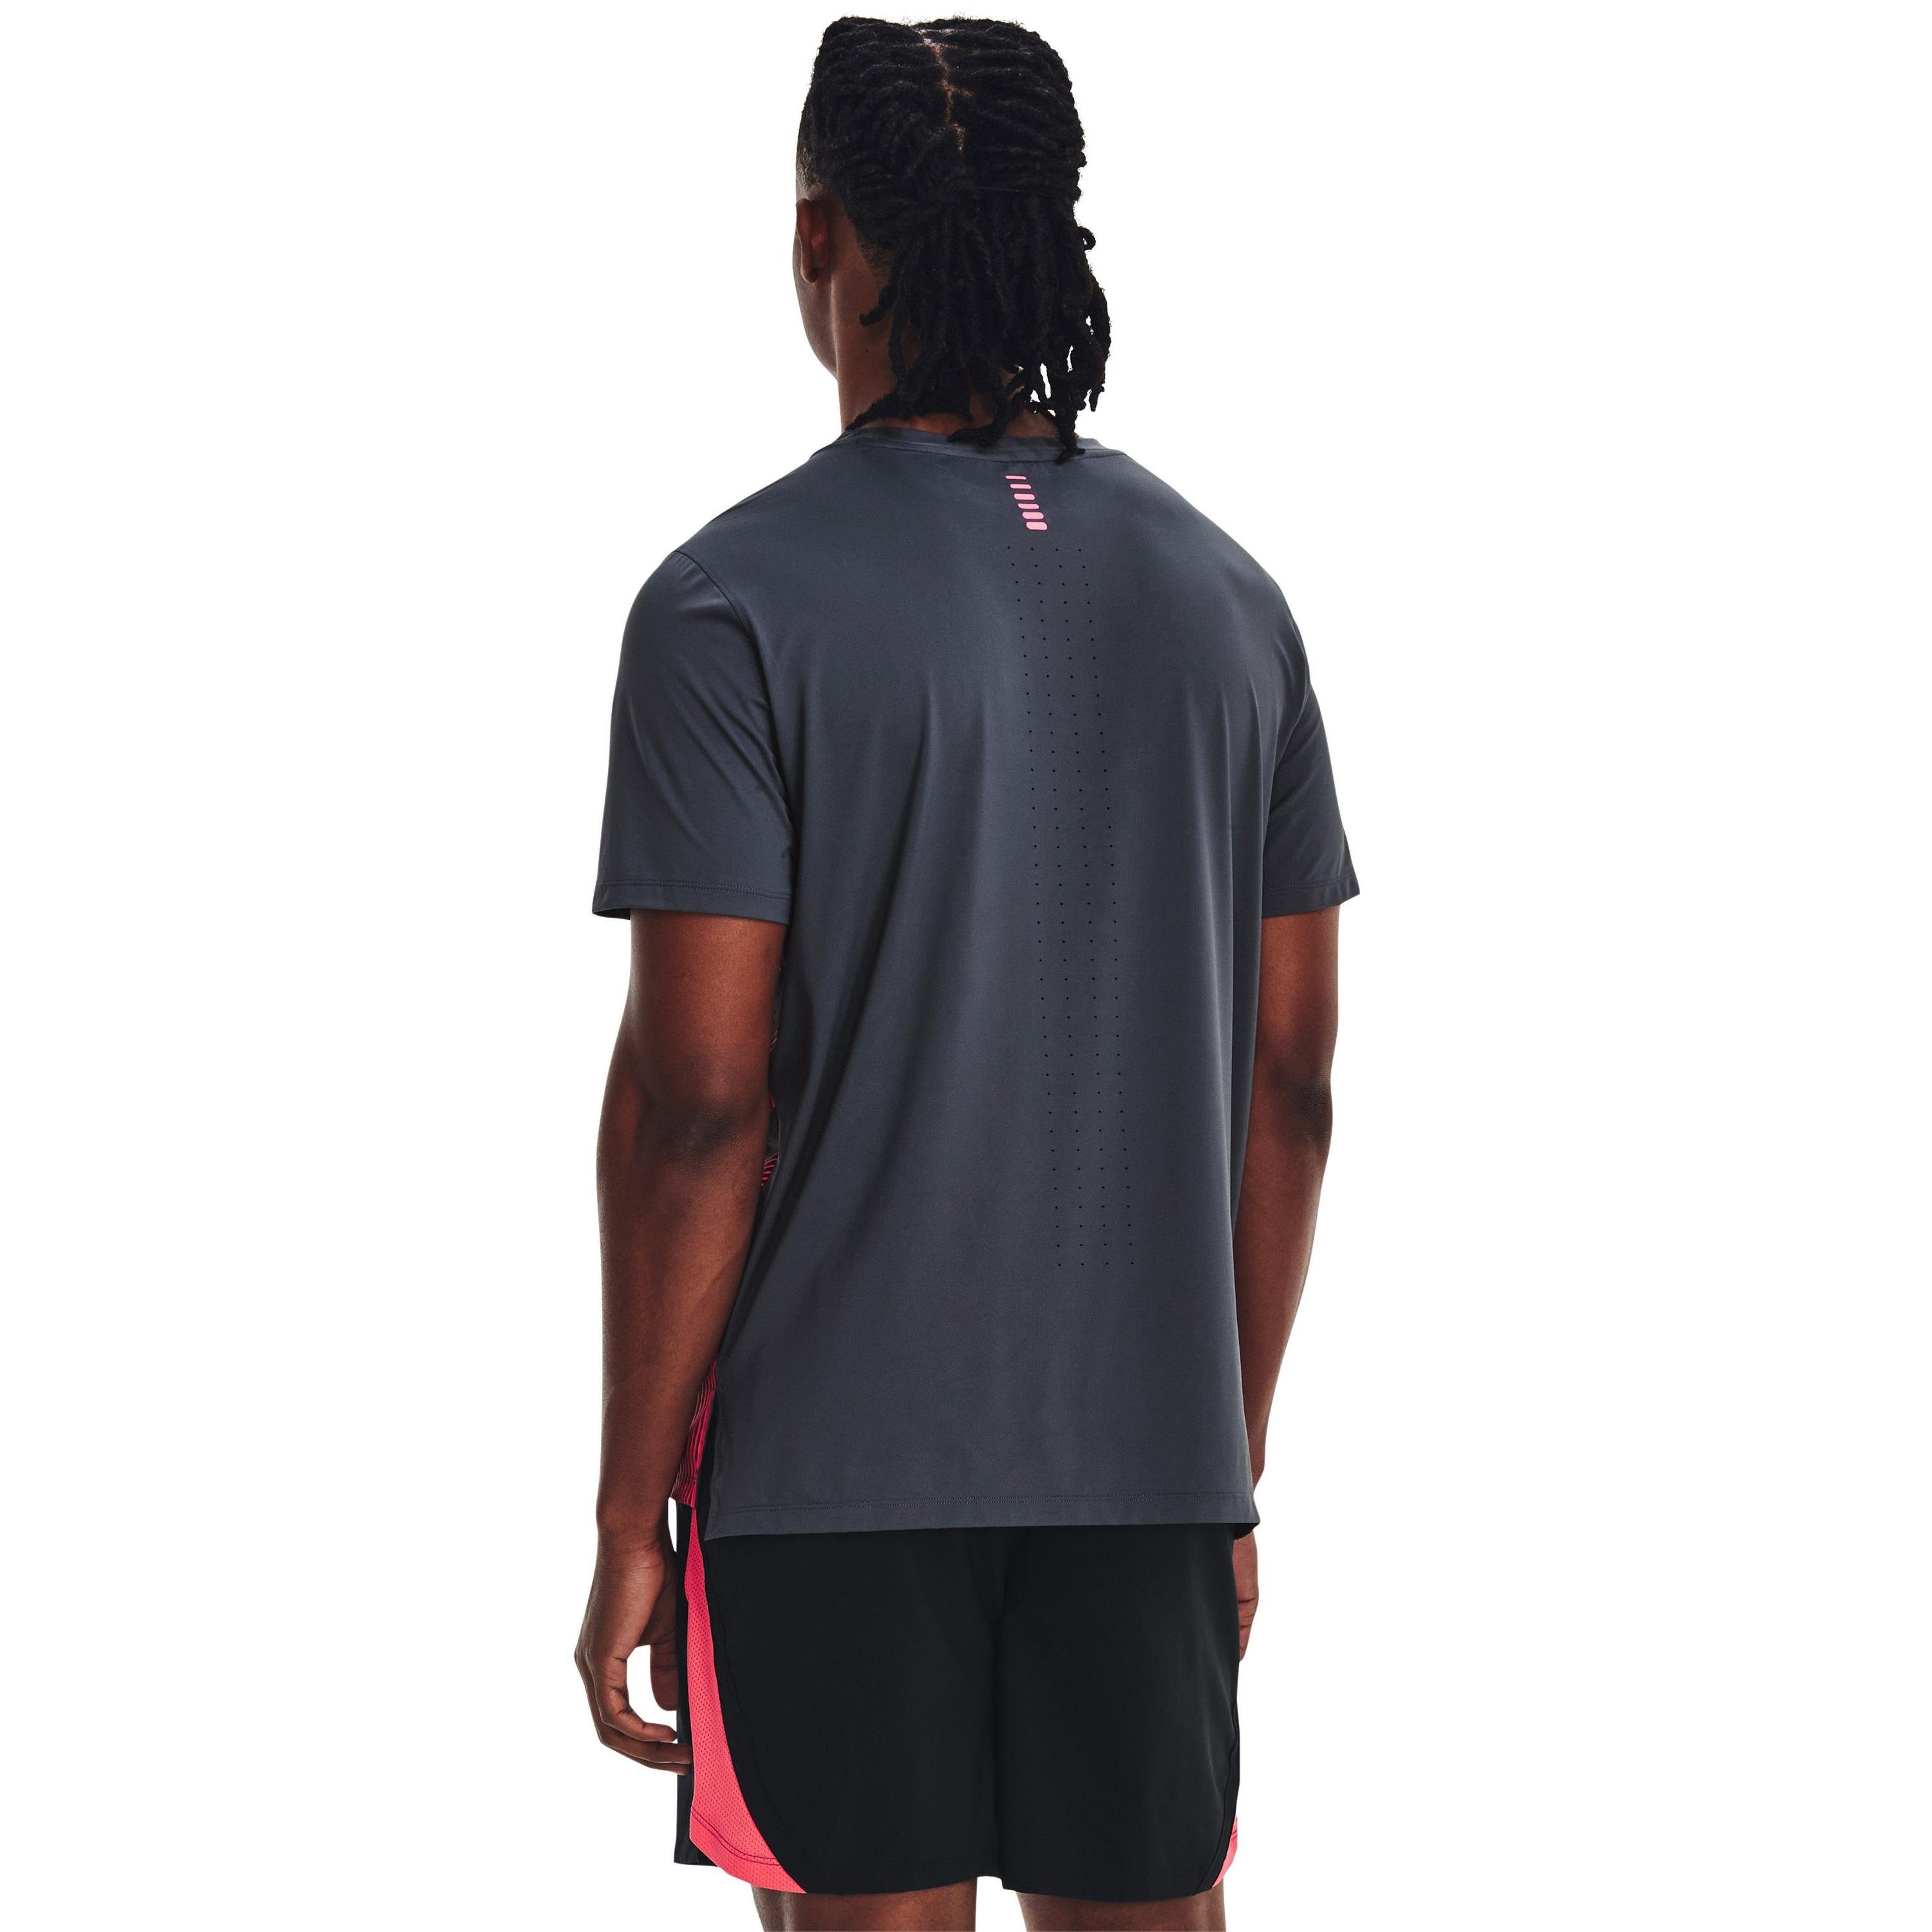 Funktionsshirt Under Armour® downpourgray-pinkshock-reflective LASER ISO-CHILL